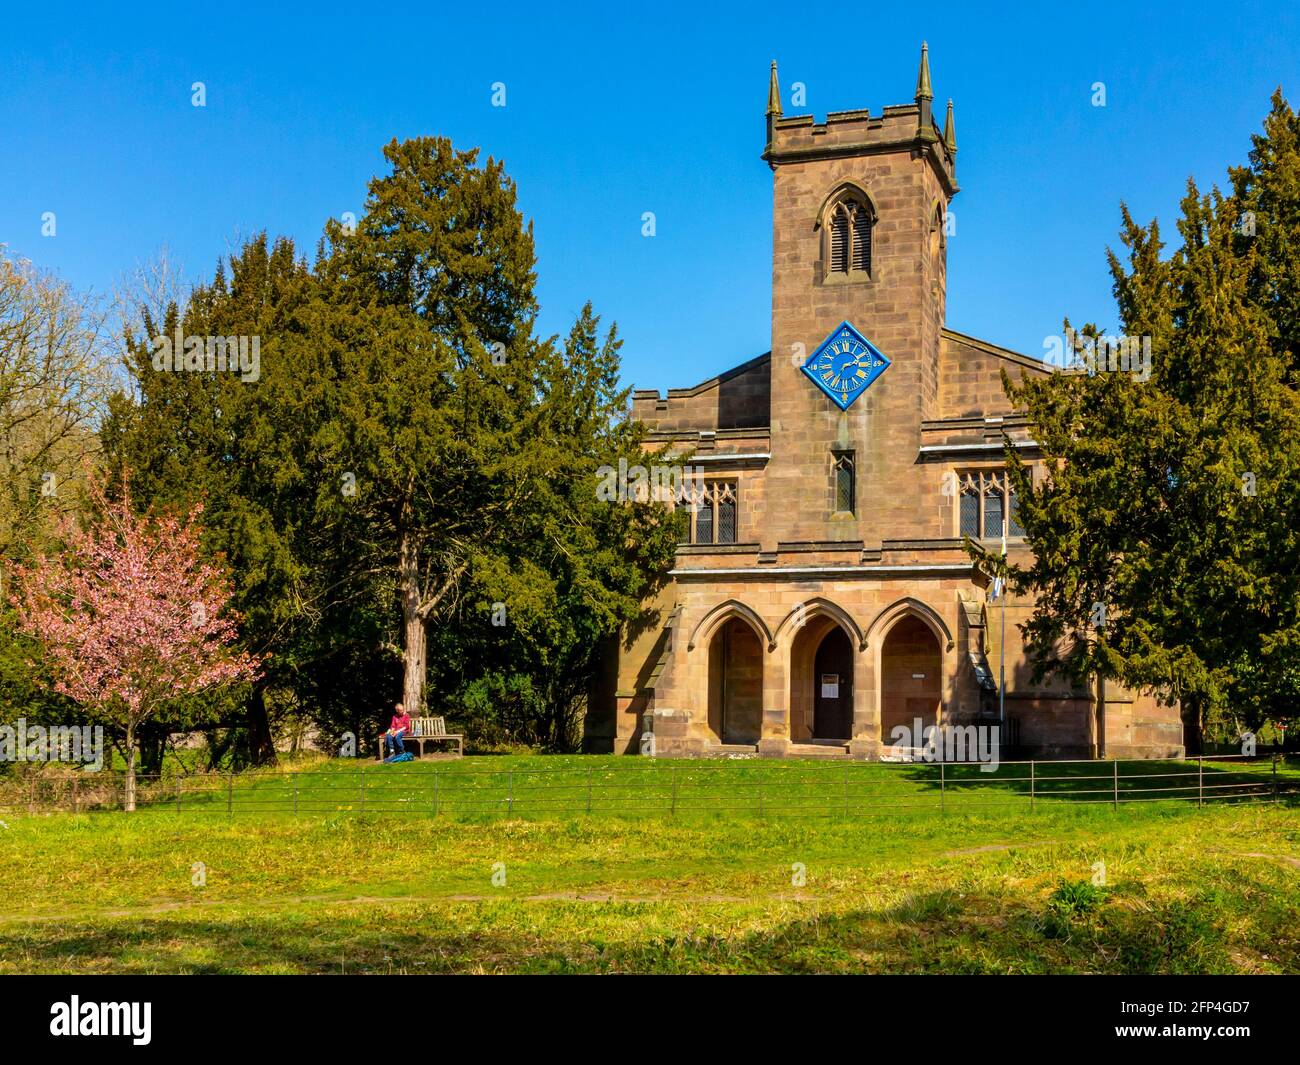 St Mary's Church in Cromford Derbyshire England a grade 1 listed building where Sir Richard Arkwright who built nearby Cromford Mill is buried. Stock Photo